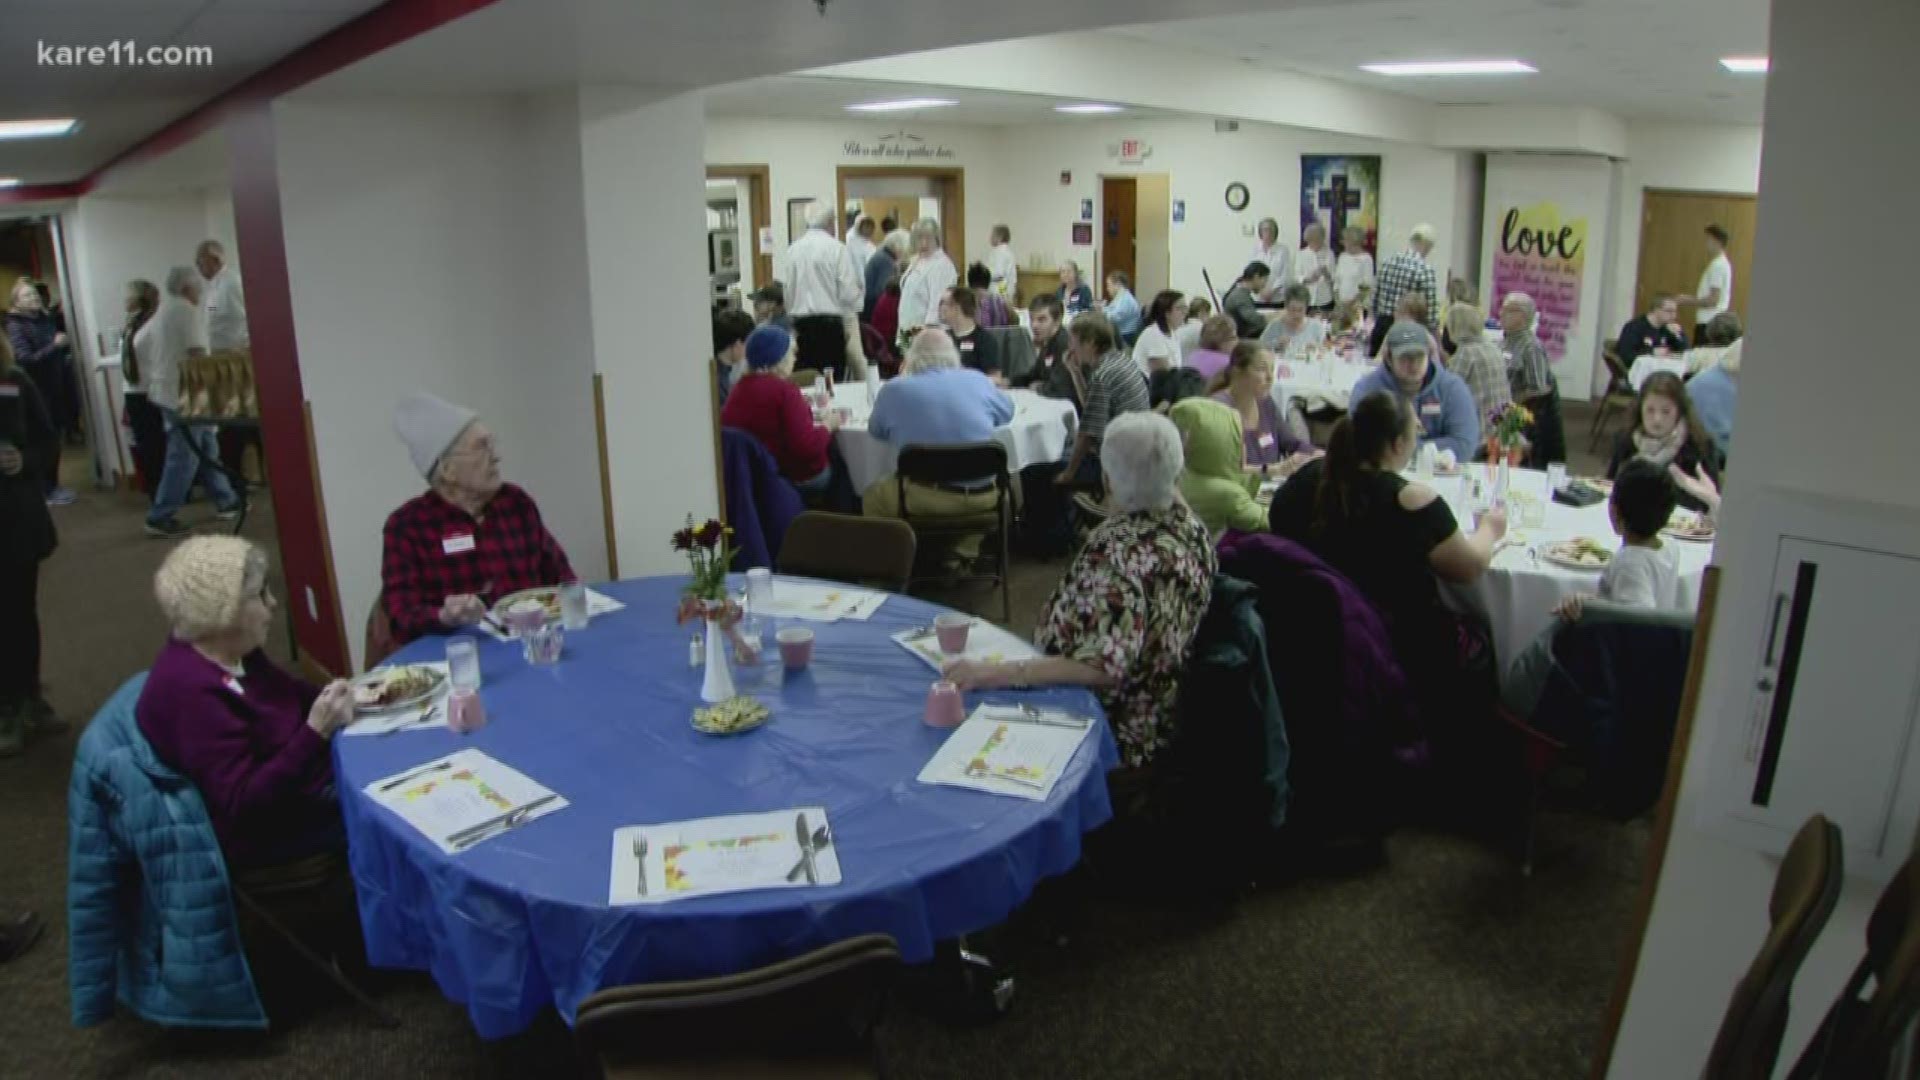 St. Paul Lutheran Church in Stillwater hosted the event for the first time to help raise awareness about loneliness within the community.